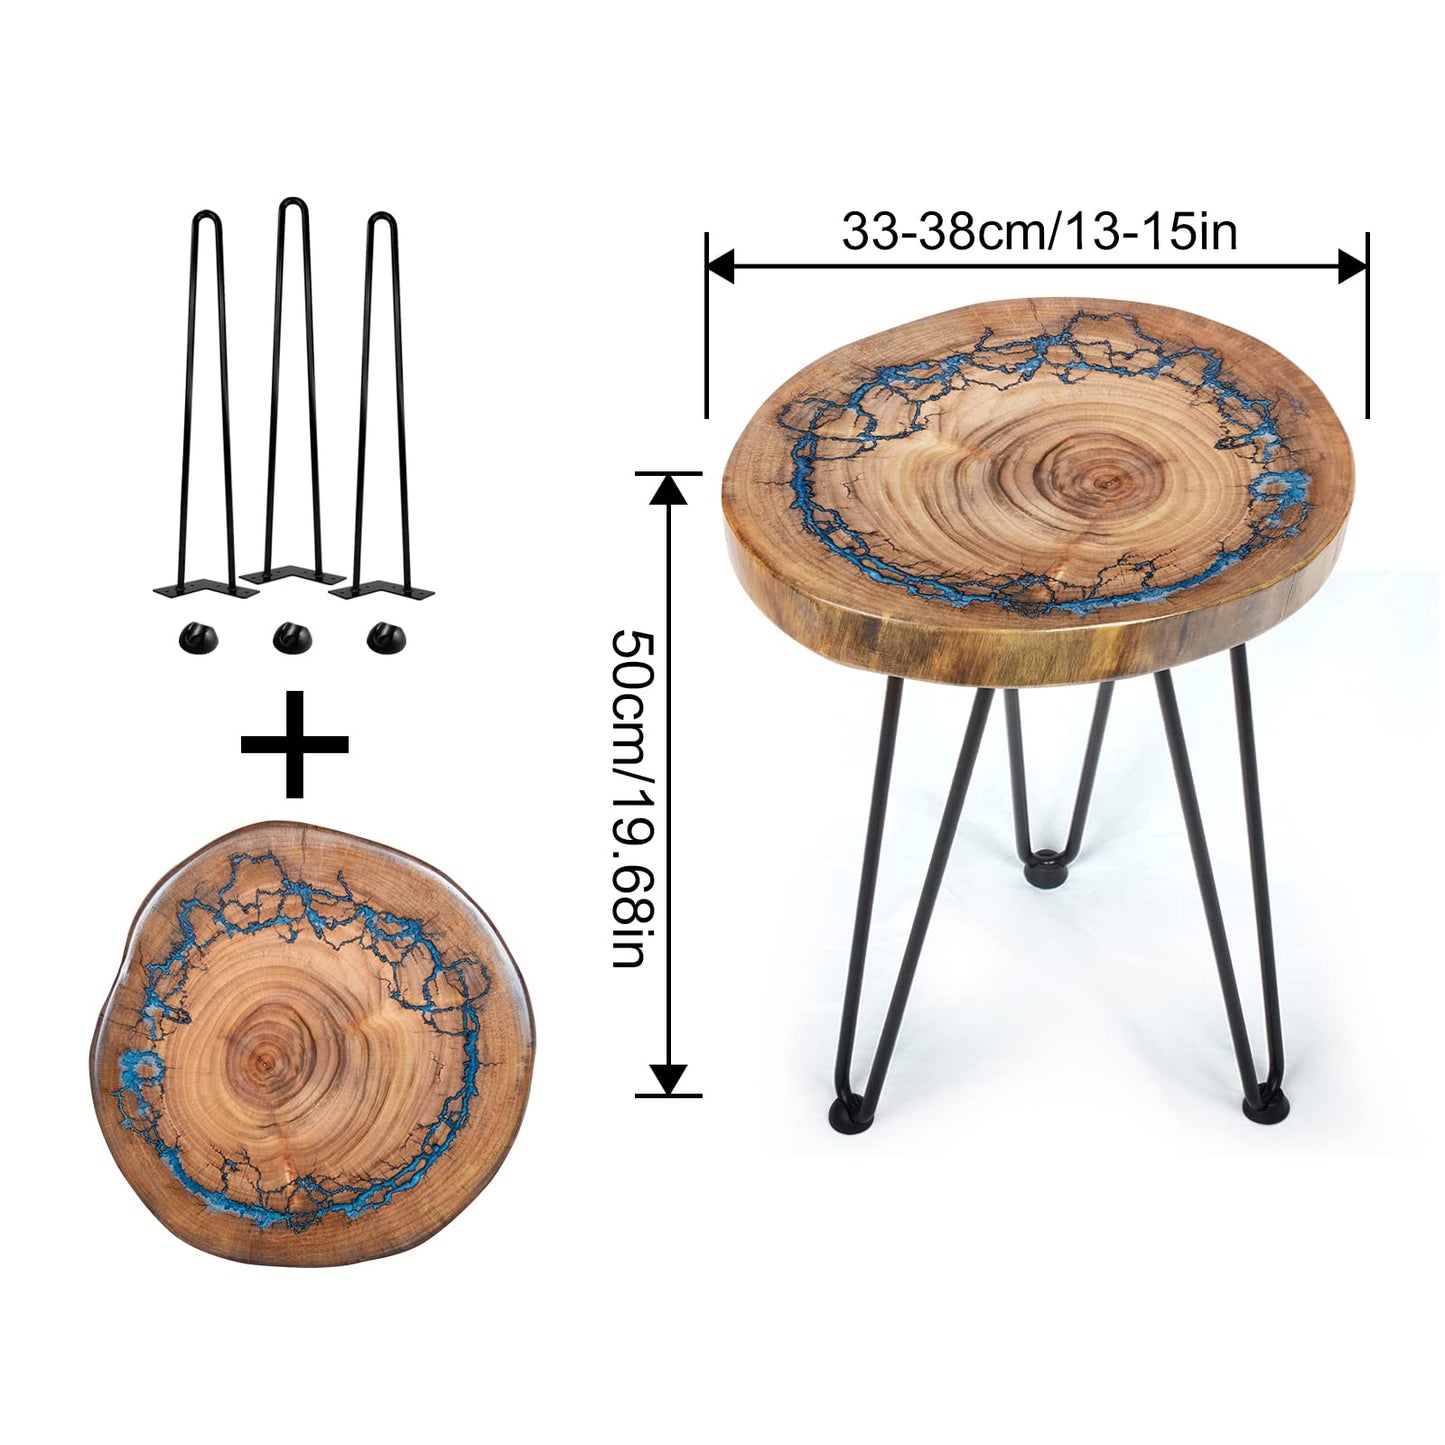 BTEOBFY Natural Wood Side Table with Epoxy Finish - Live Edge Design and Hairpin Legs - Perfect for Living Room as Coffee Table or End Table - 20 Inches Tall